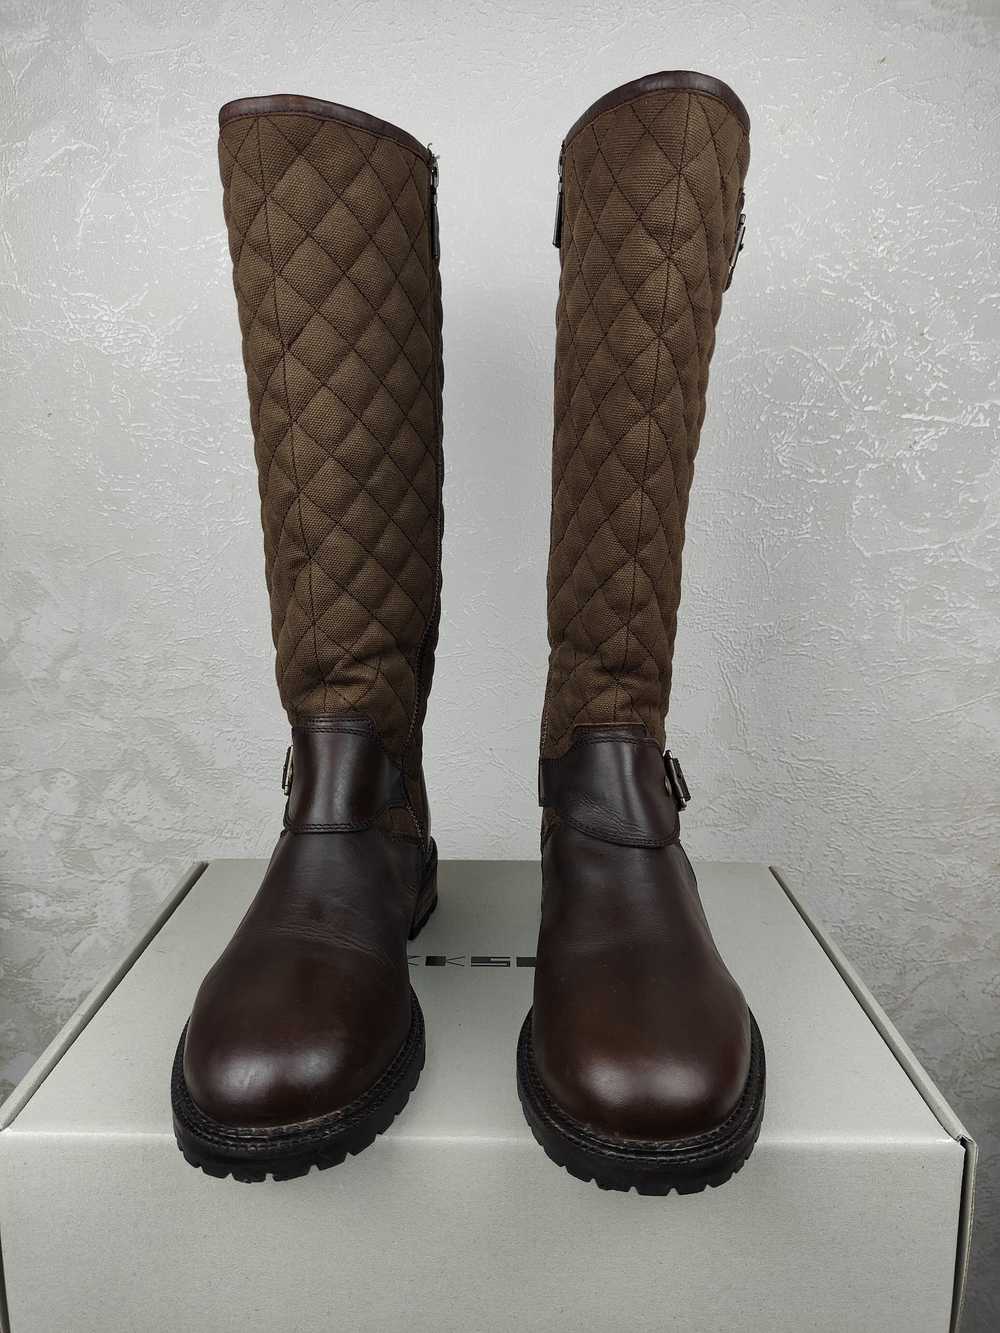 Barbour Barbour International Quilted Boots - image 2